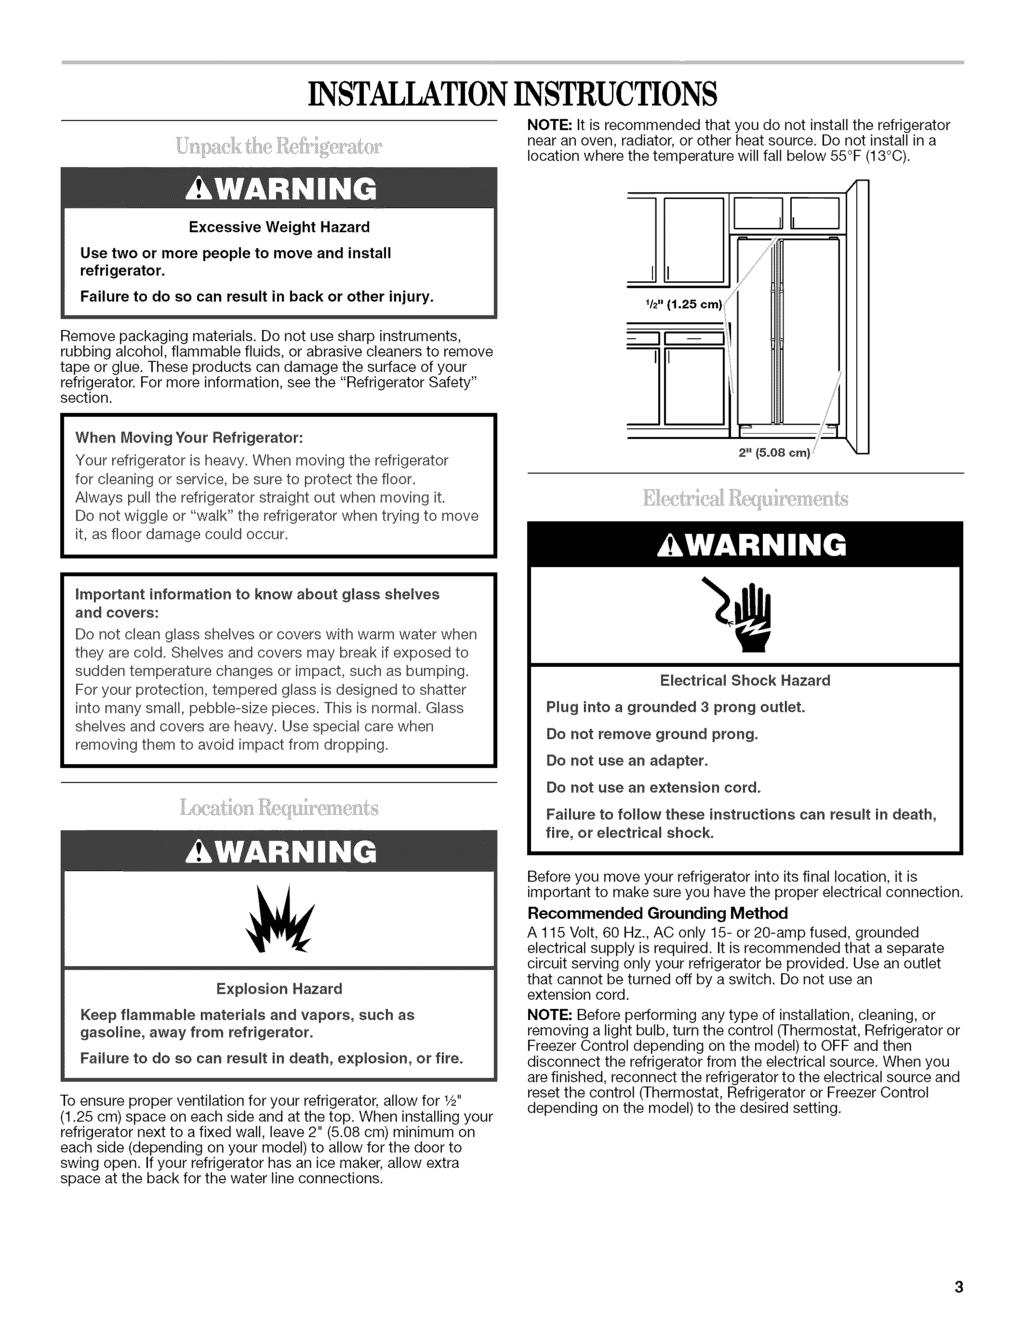 INSTALLATIONINSTRUCTIONS NOTE: It is recommended that you do not install the refrigerator near an oven, radiator, or other heat source.